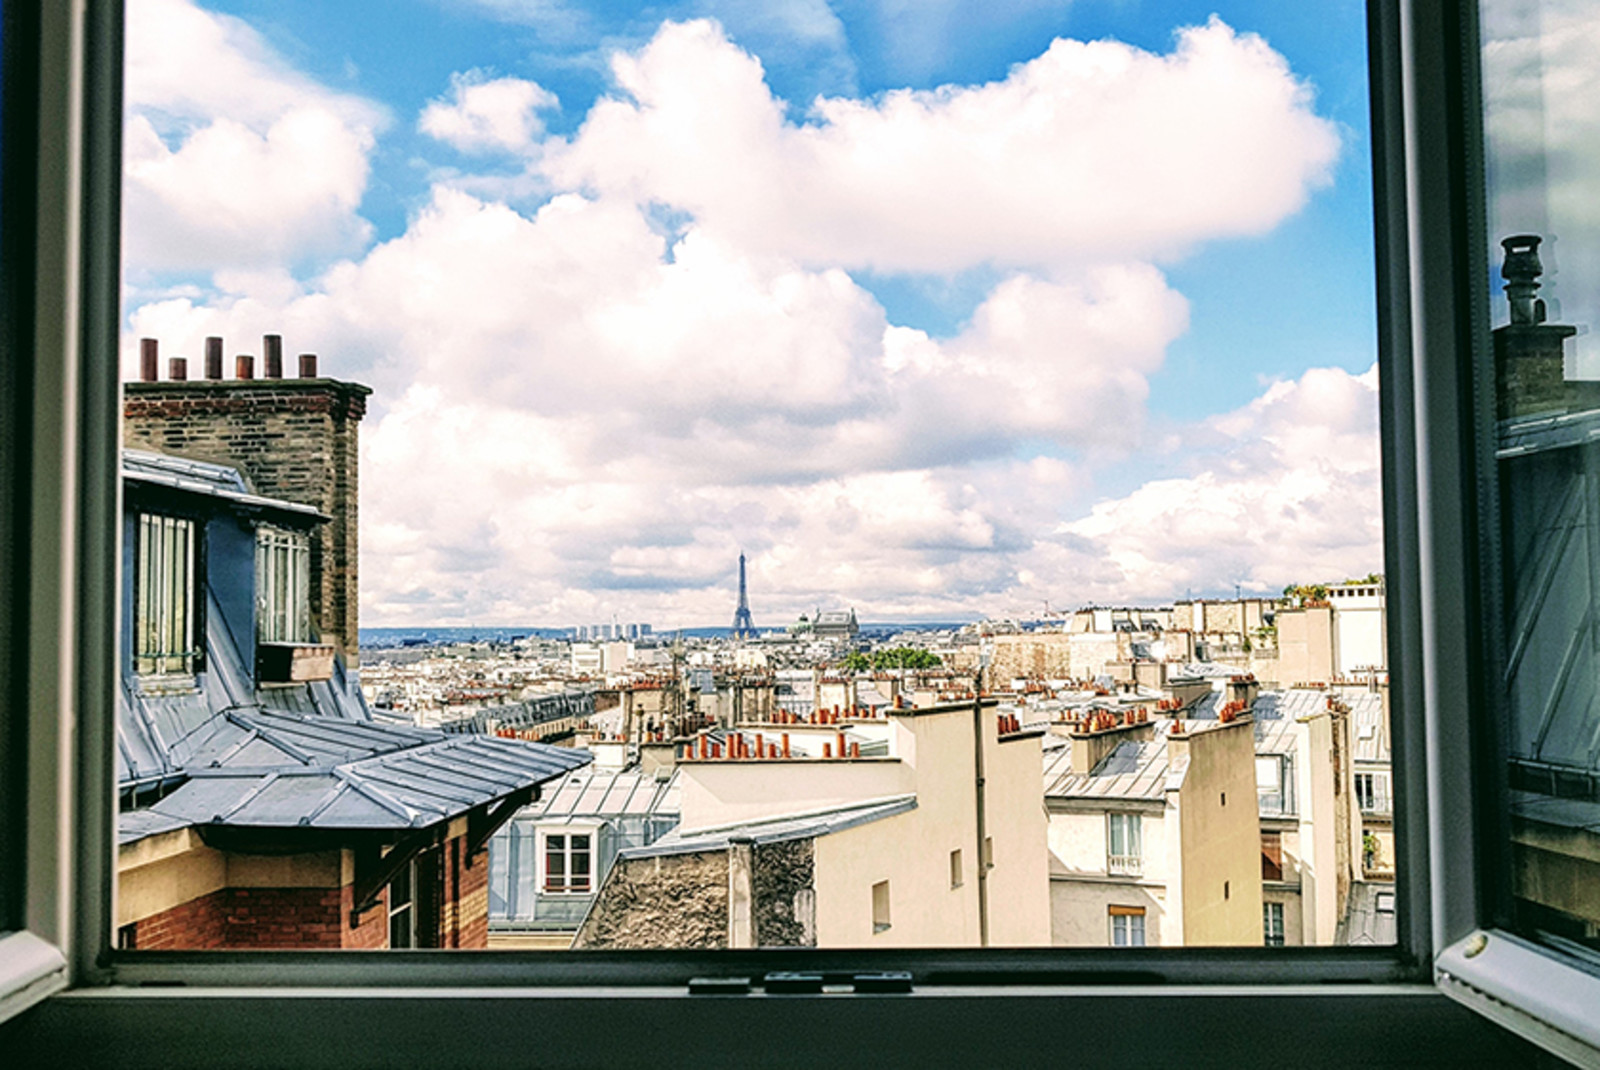 City view of Paris France out an open window with white clouds and blue sky and the Eiffel Tower in the distance